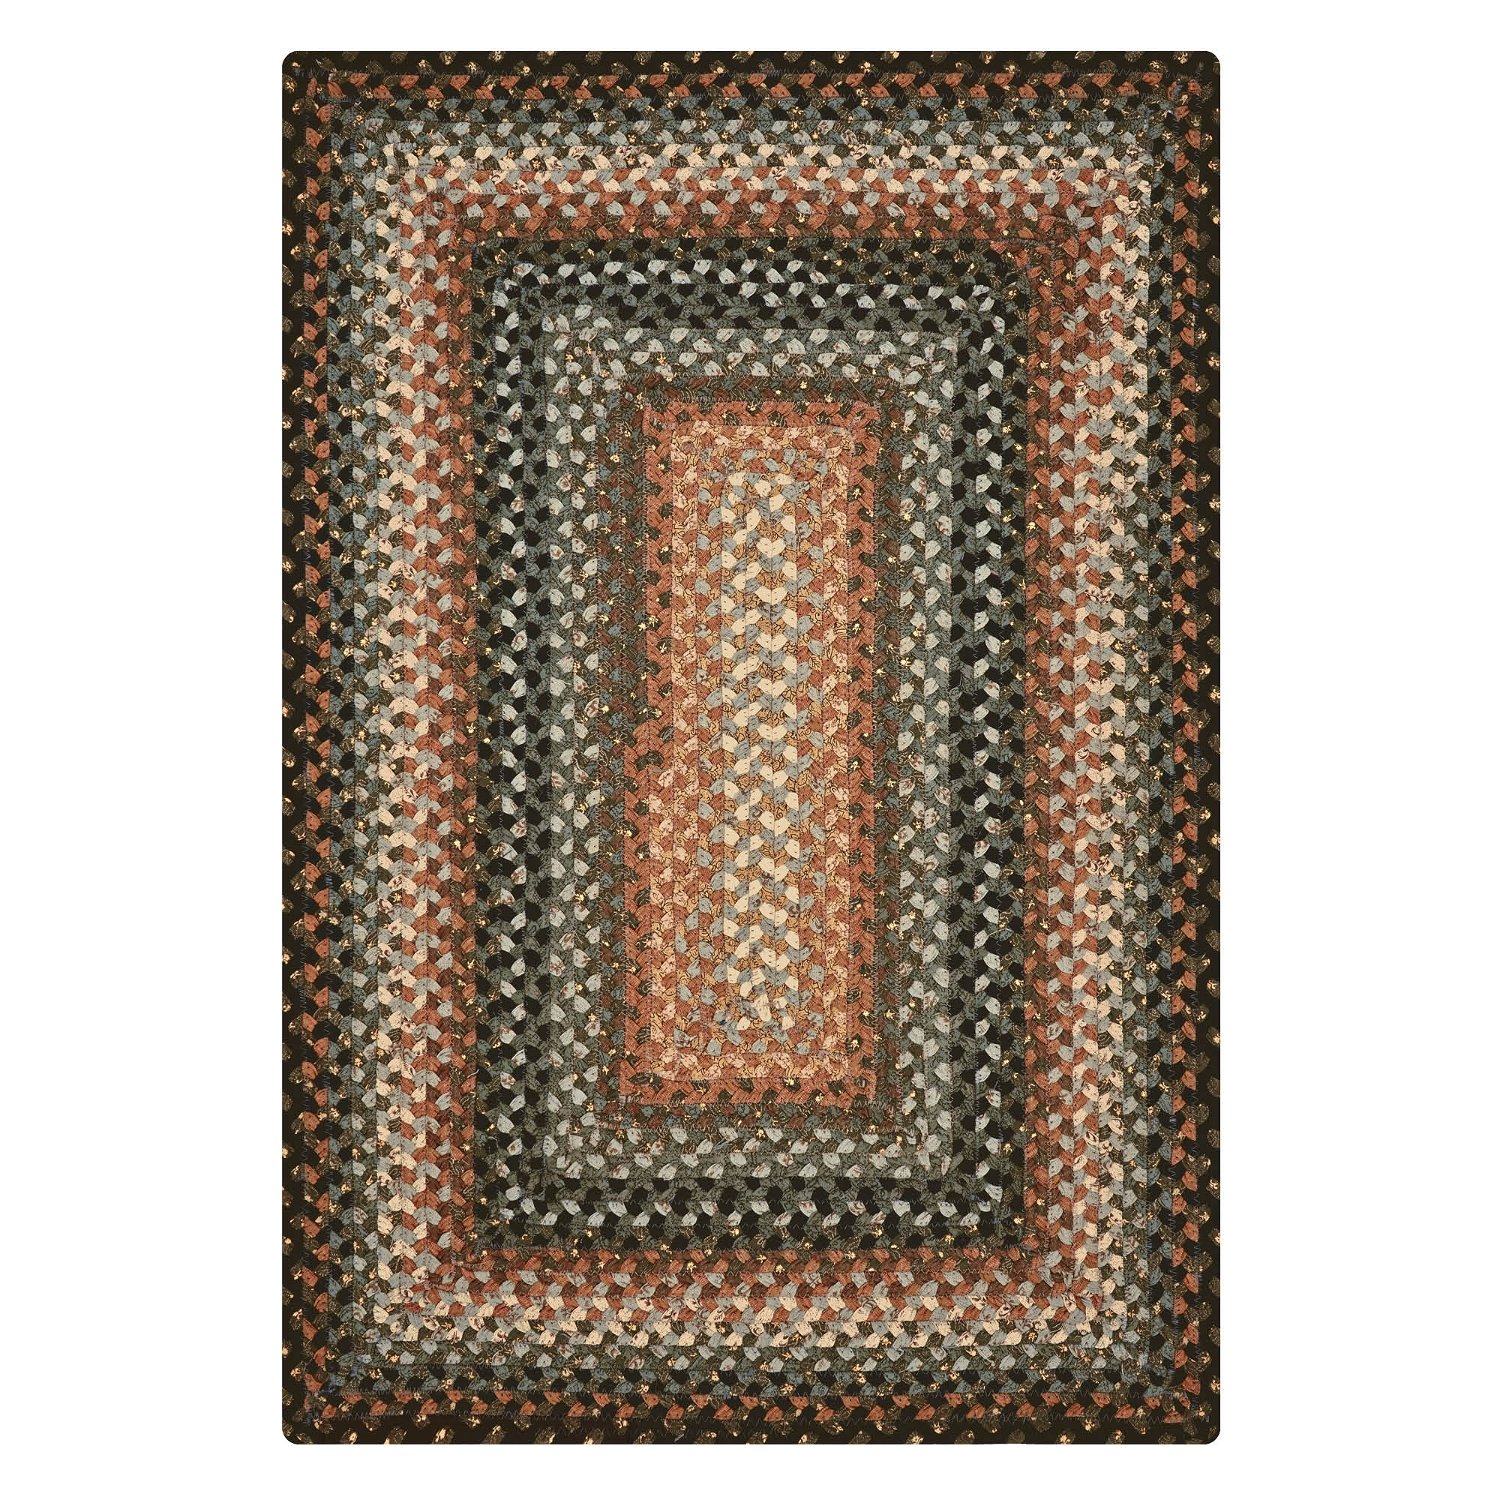 Log Cabin Step Blue-Burgundy-Brown Oval Cotton Braided Rugs Reversible